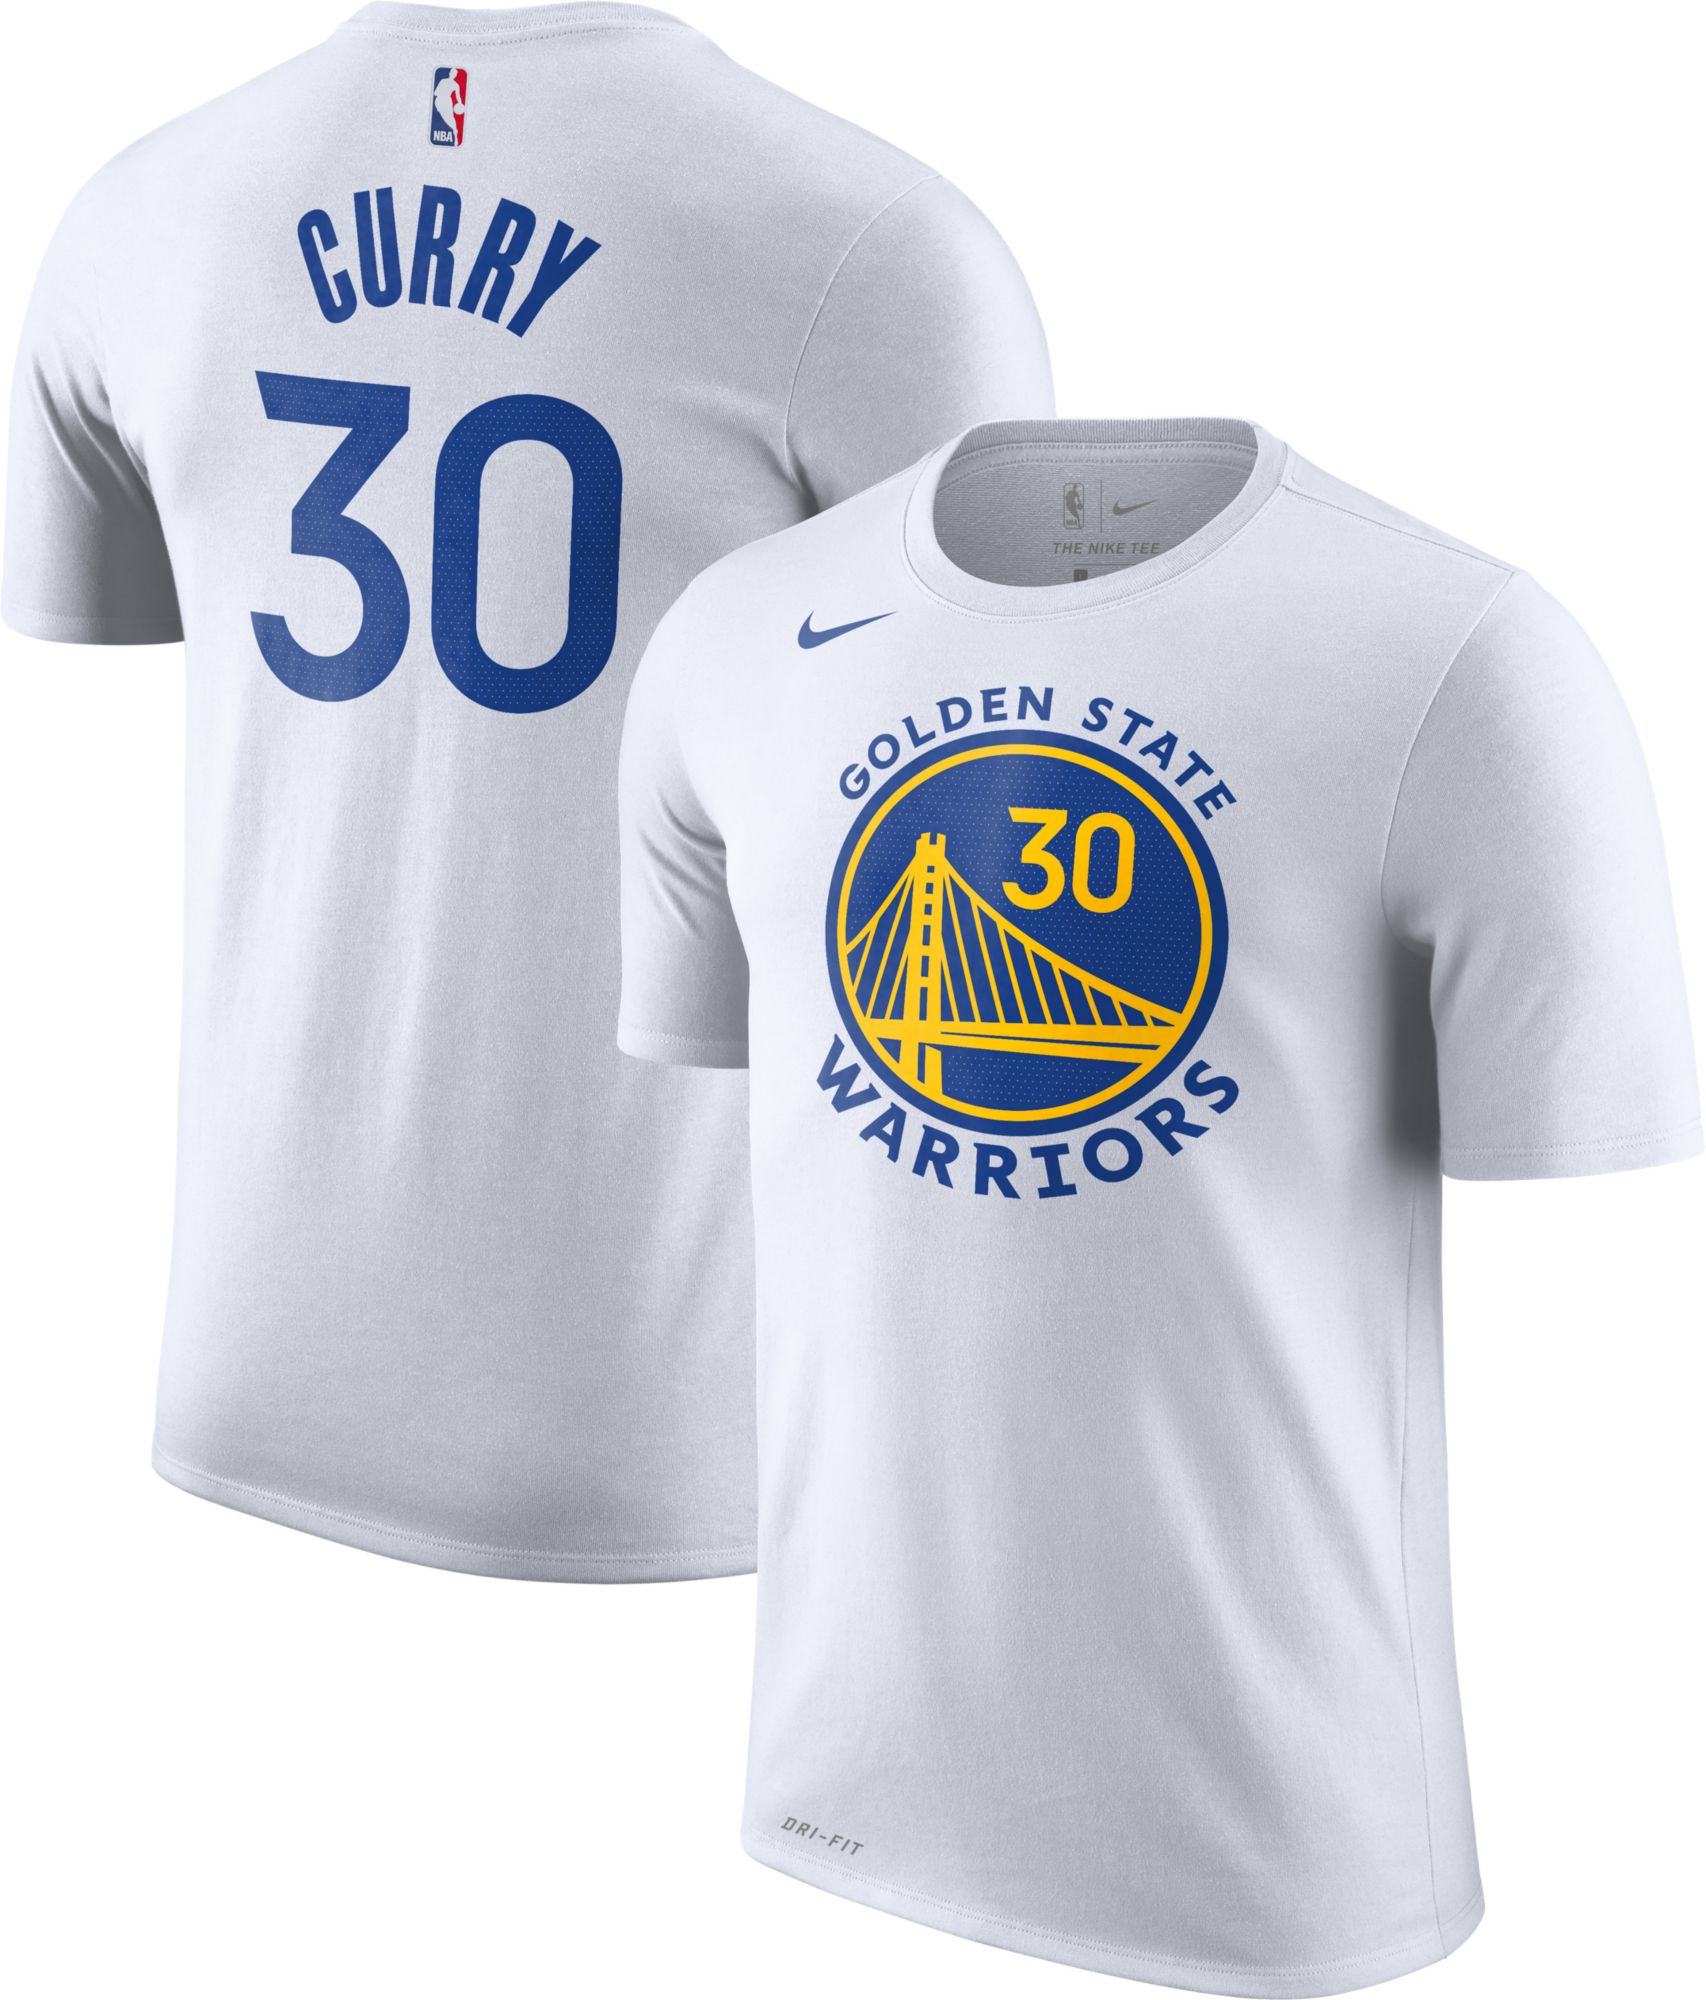 golden state warriors youth apparel